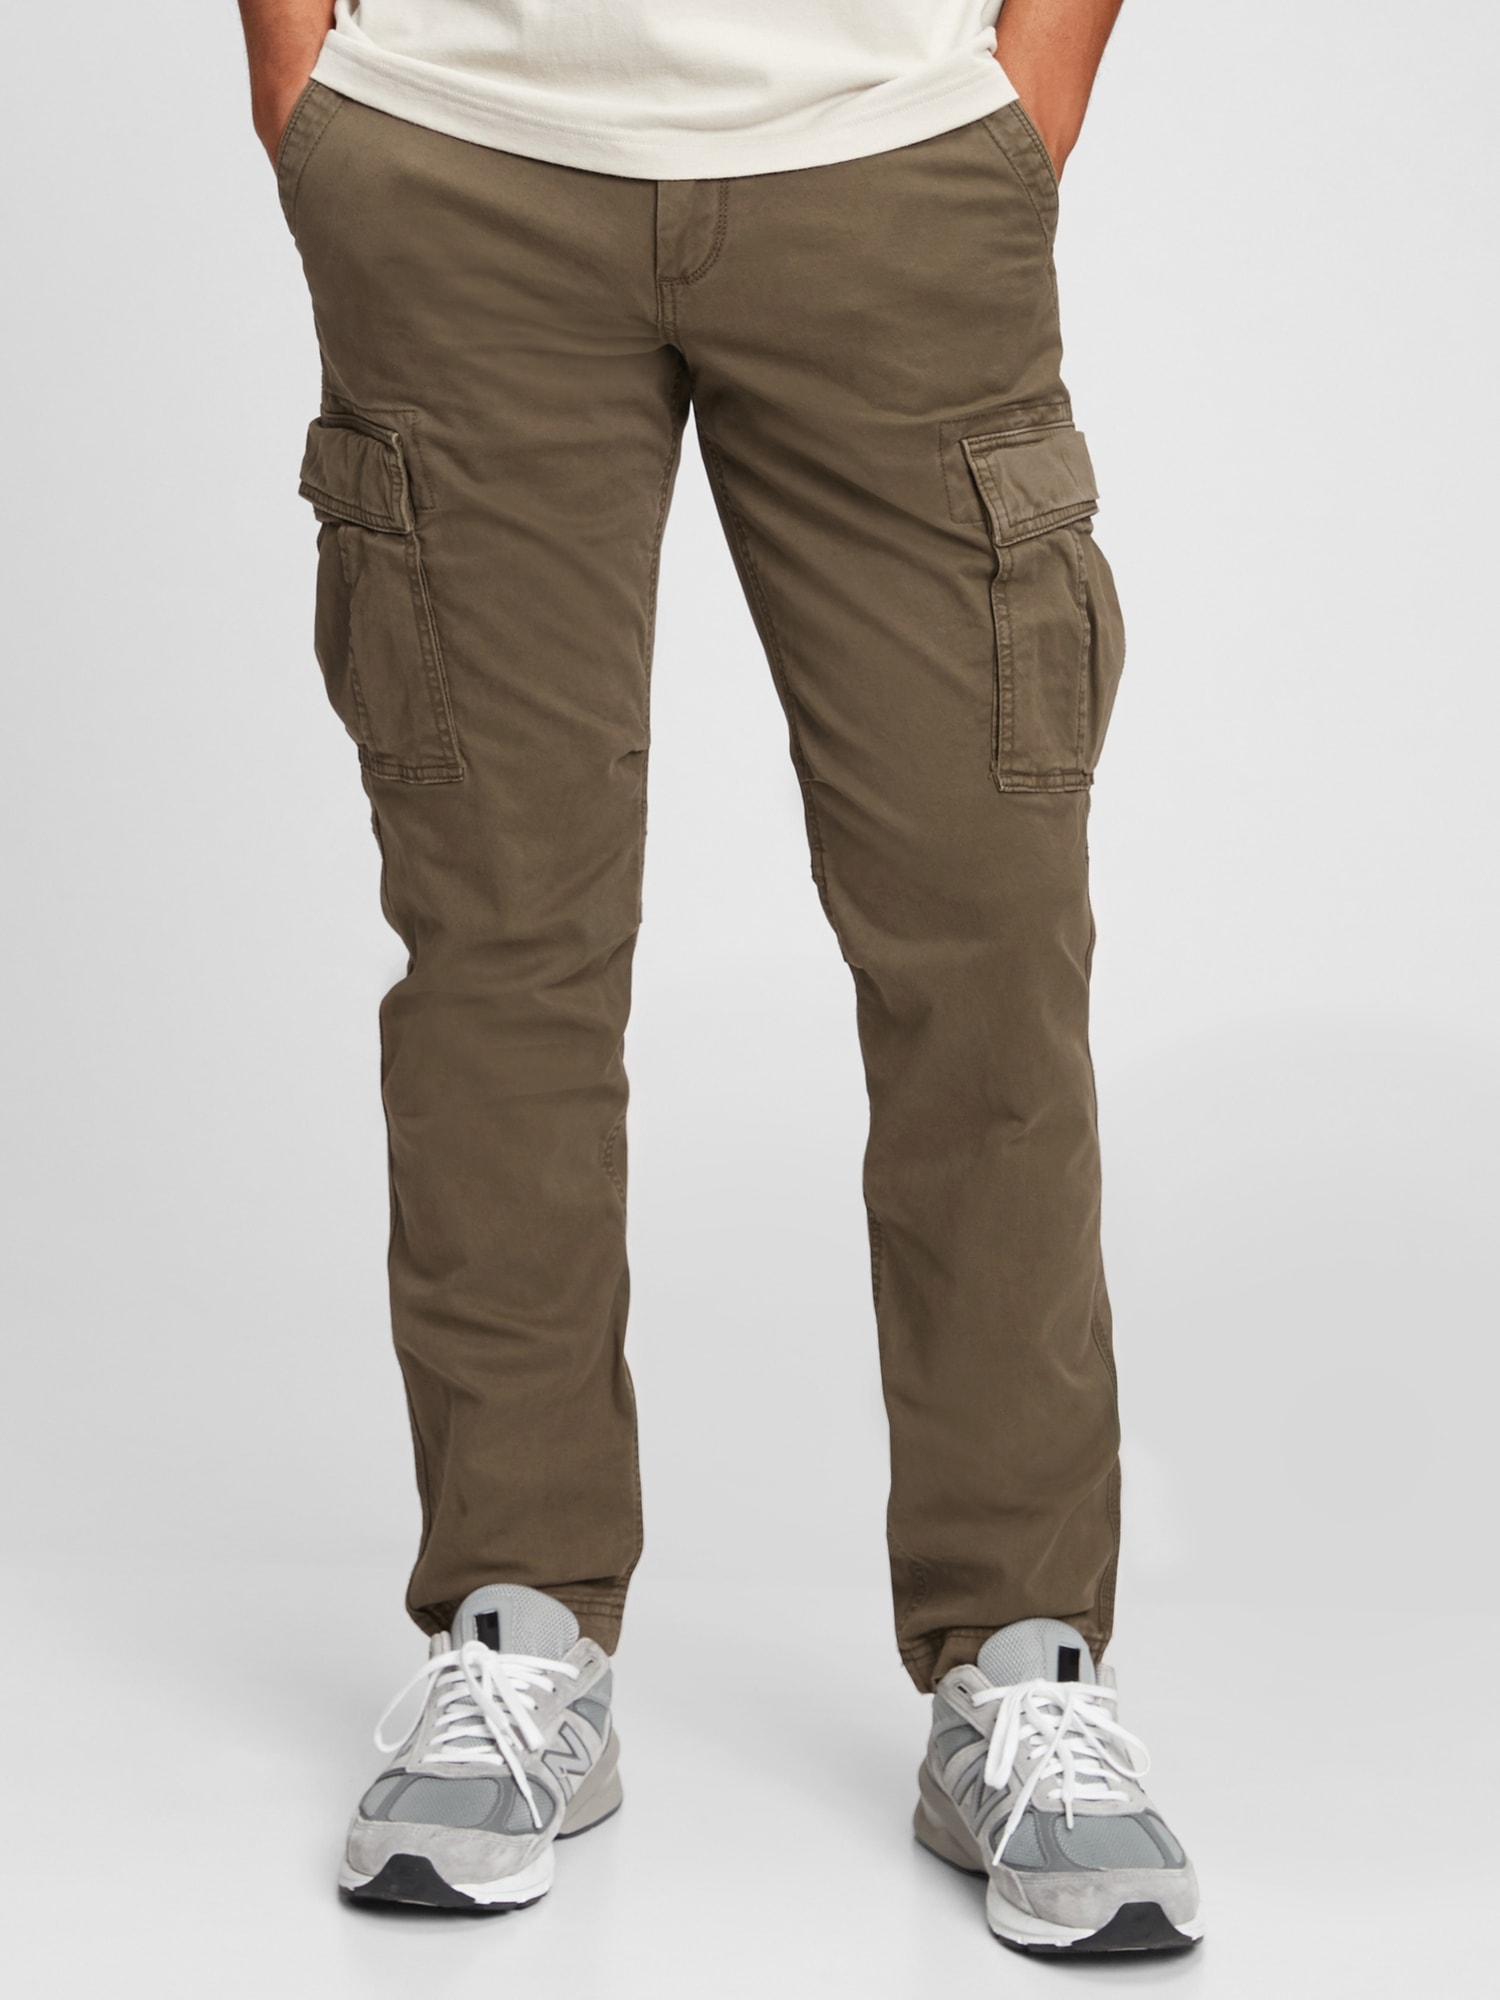 Gap Cargo Pants With Flex In Canyon Brown